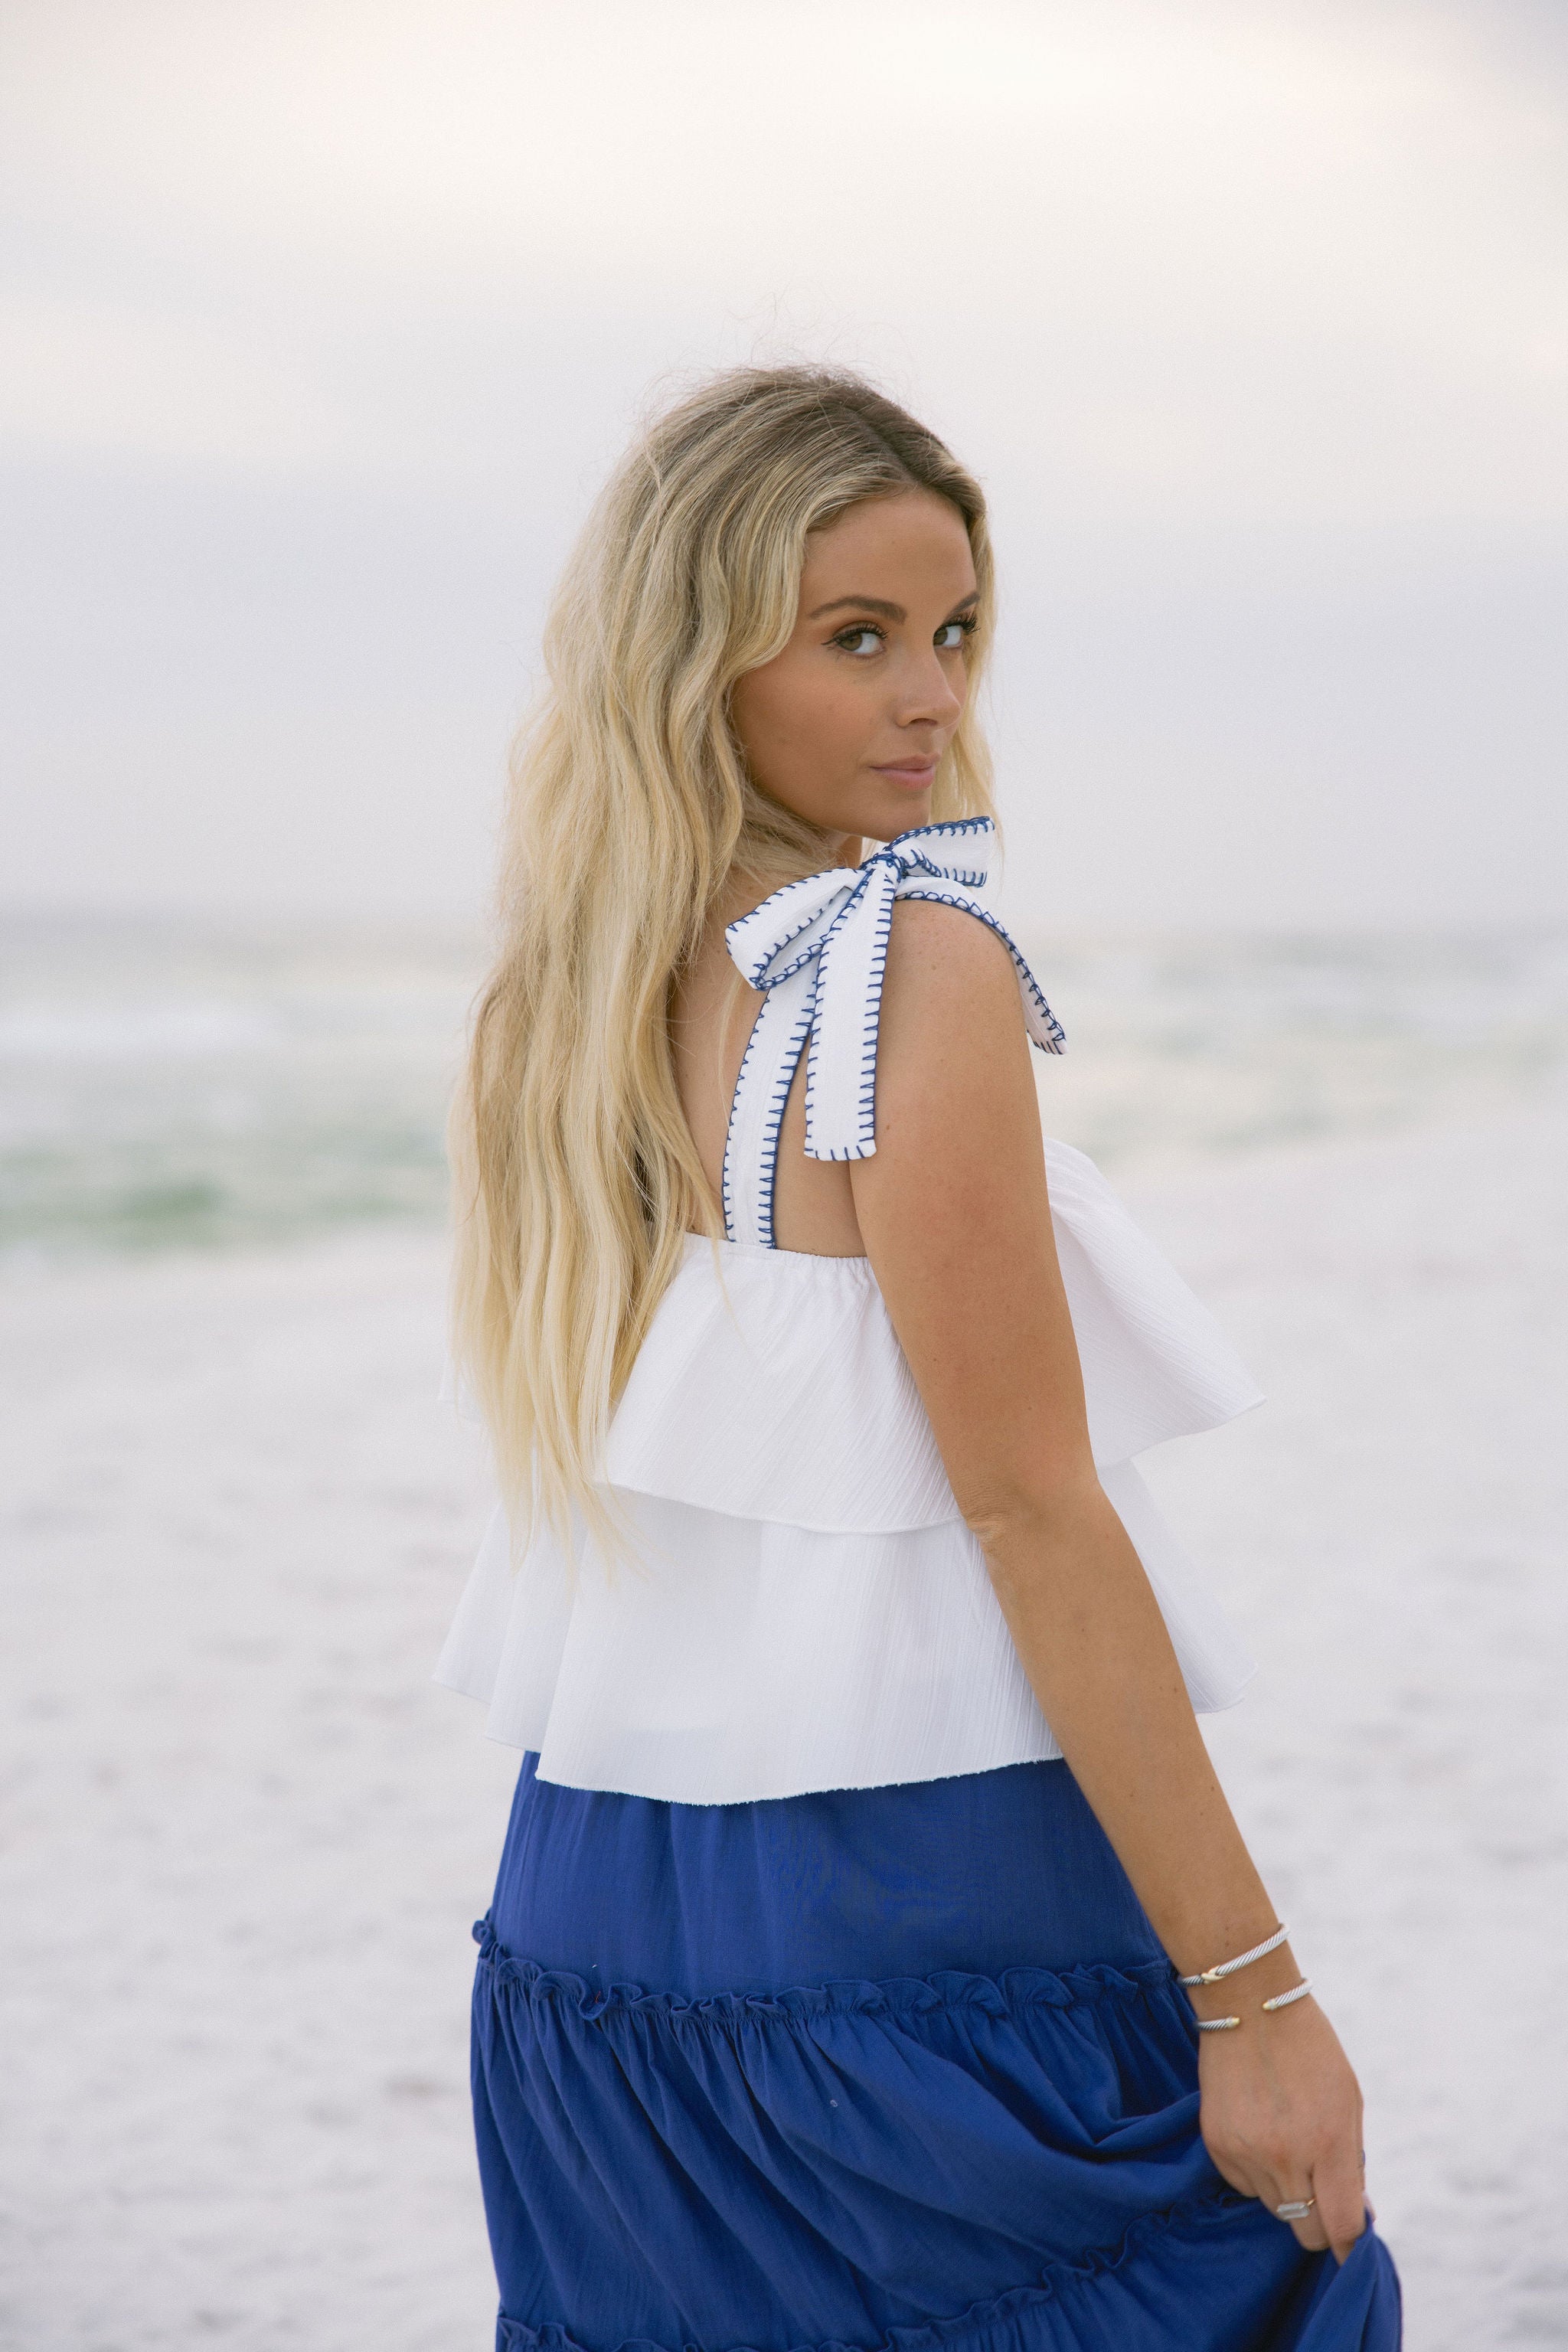 Upper body side view of female model wearing the Madelyn White Tie Strap Tank Top that has tiered white fabric and tie straps with navy trim. Worn with blue skirt.